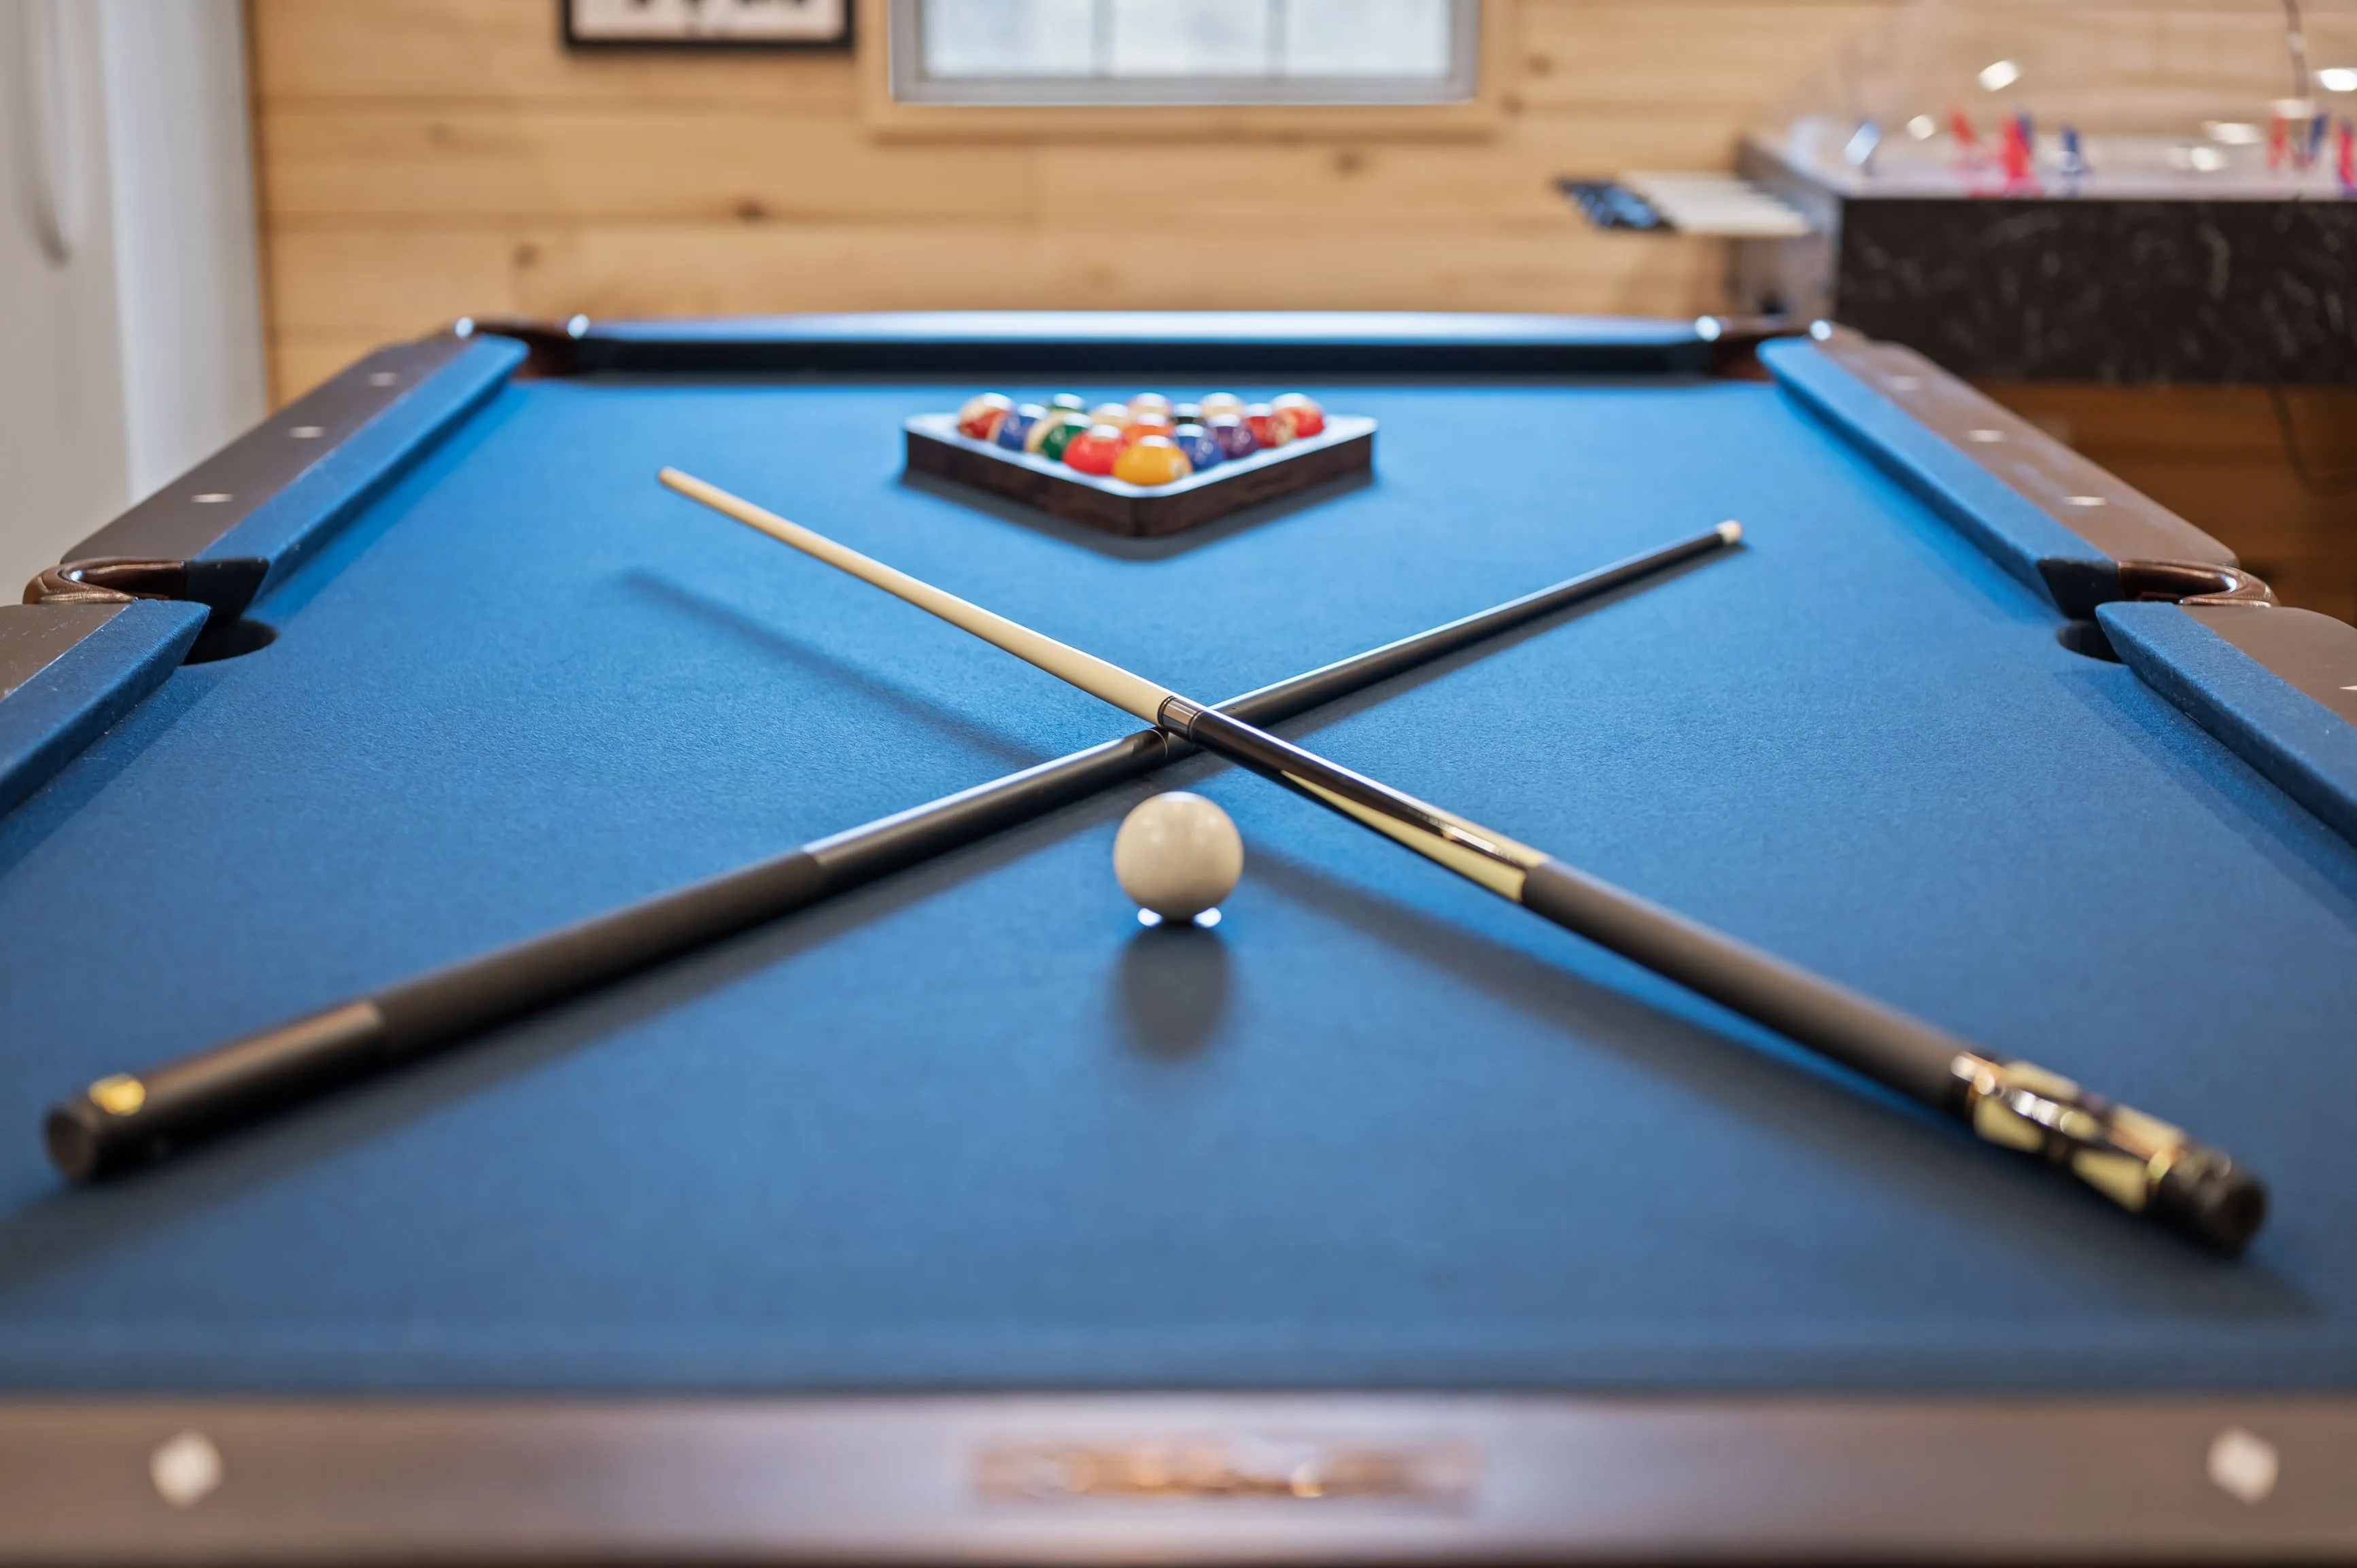 Pool cues crossed over a white ball on a blue billiard table with a rack of colorful billiard balls in the background.